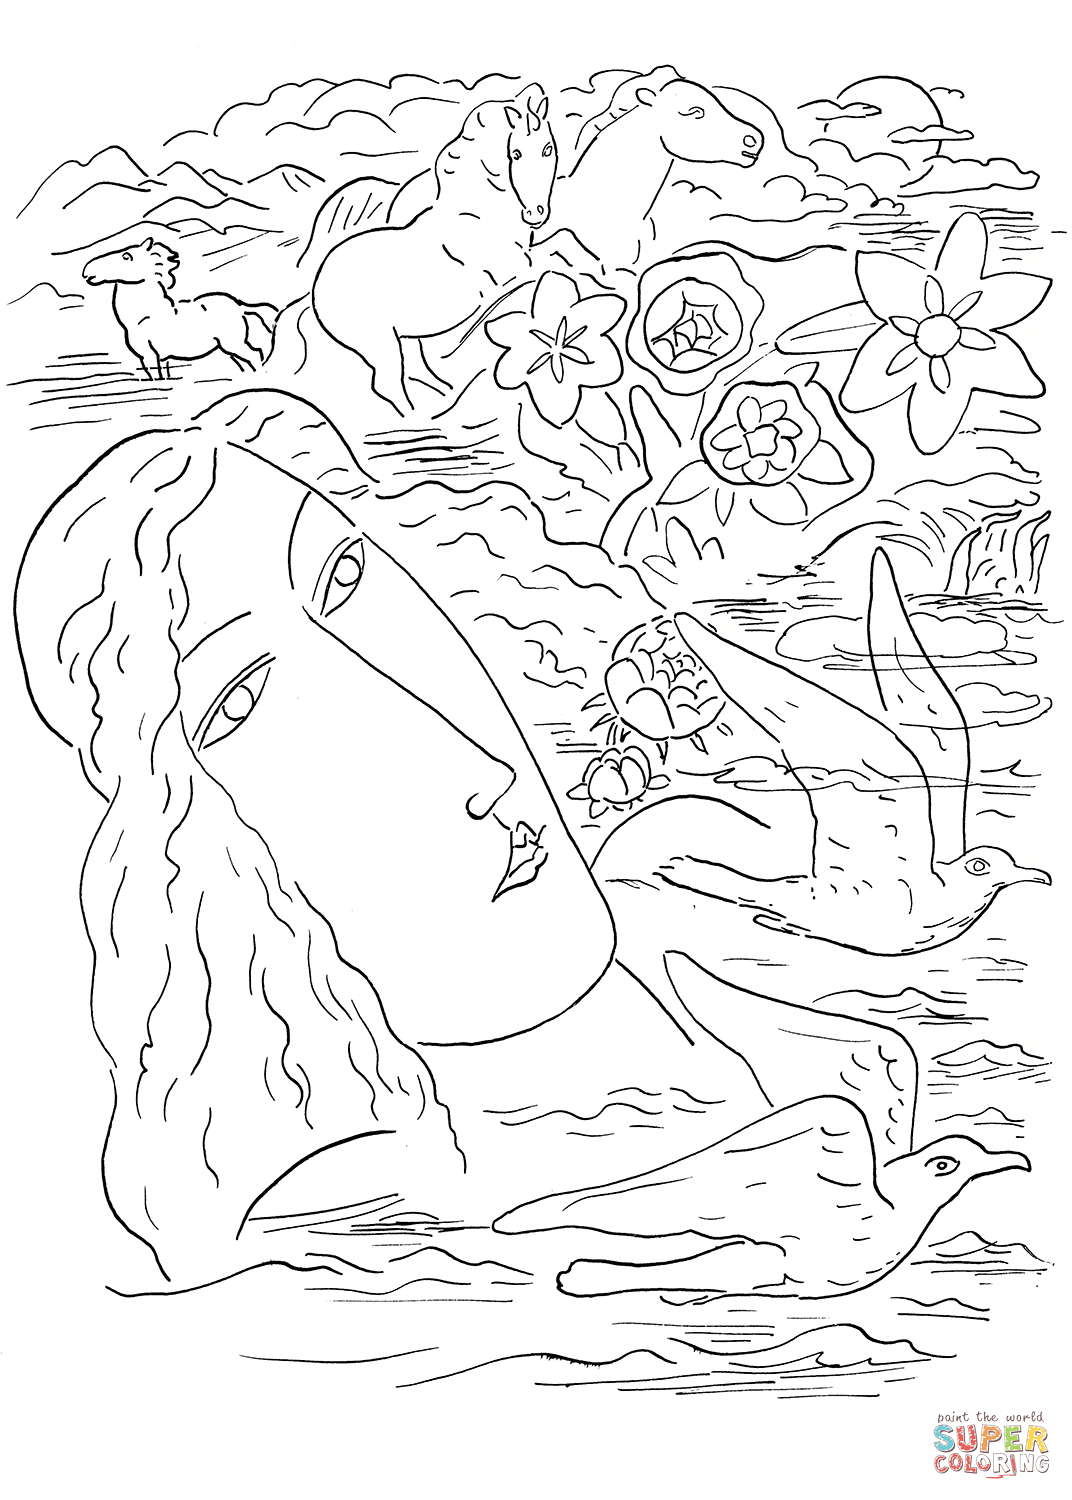 Female seagulls horses and flowers coloring page free printable coloring pages